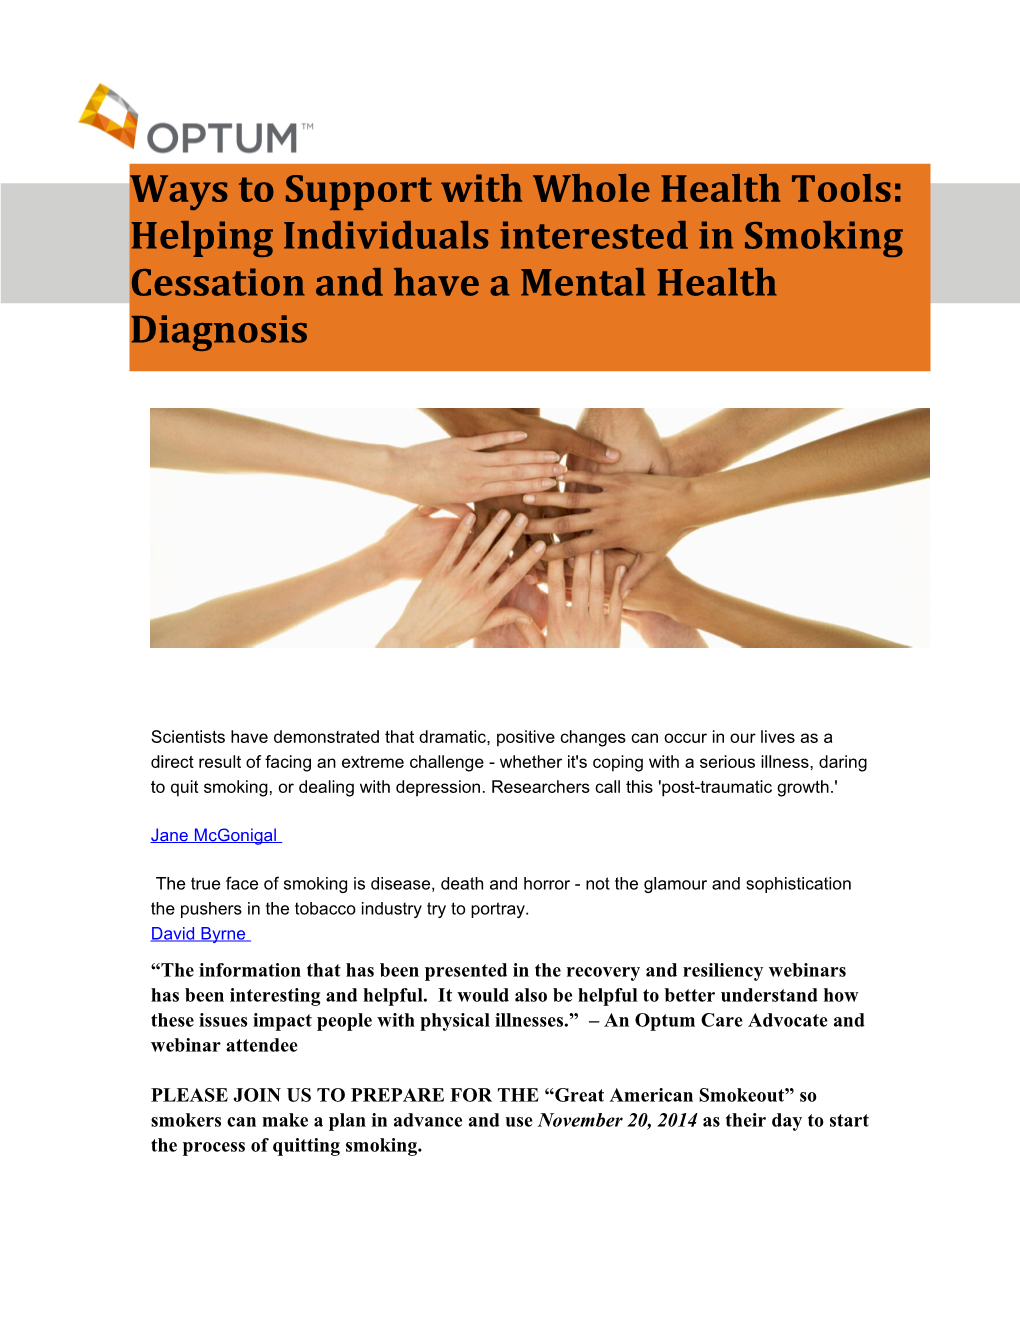 Title: Ways to Support with Whole Health Tools